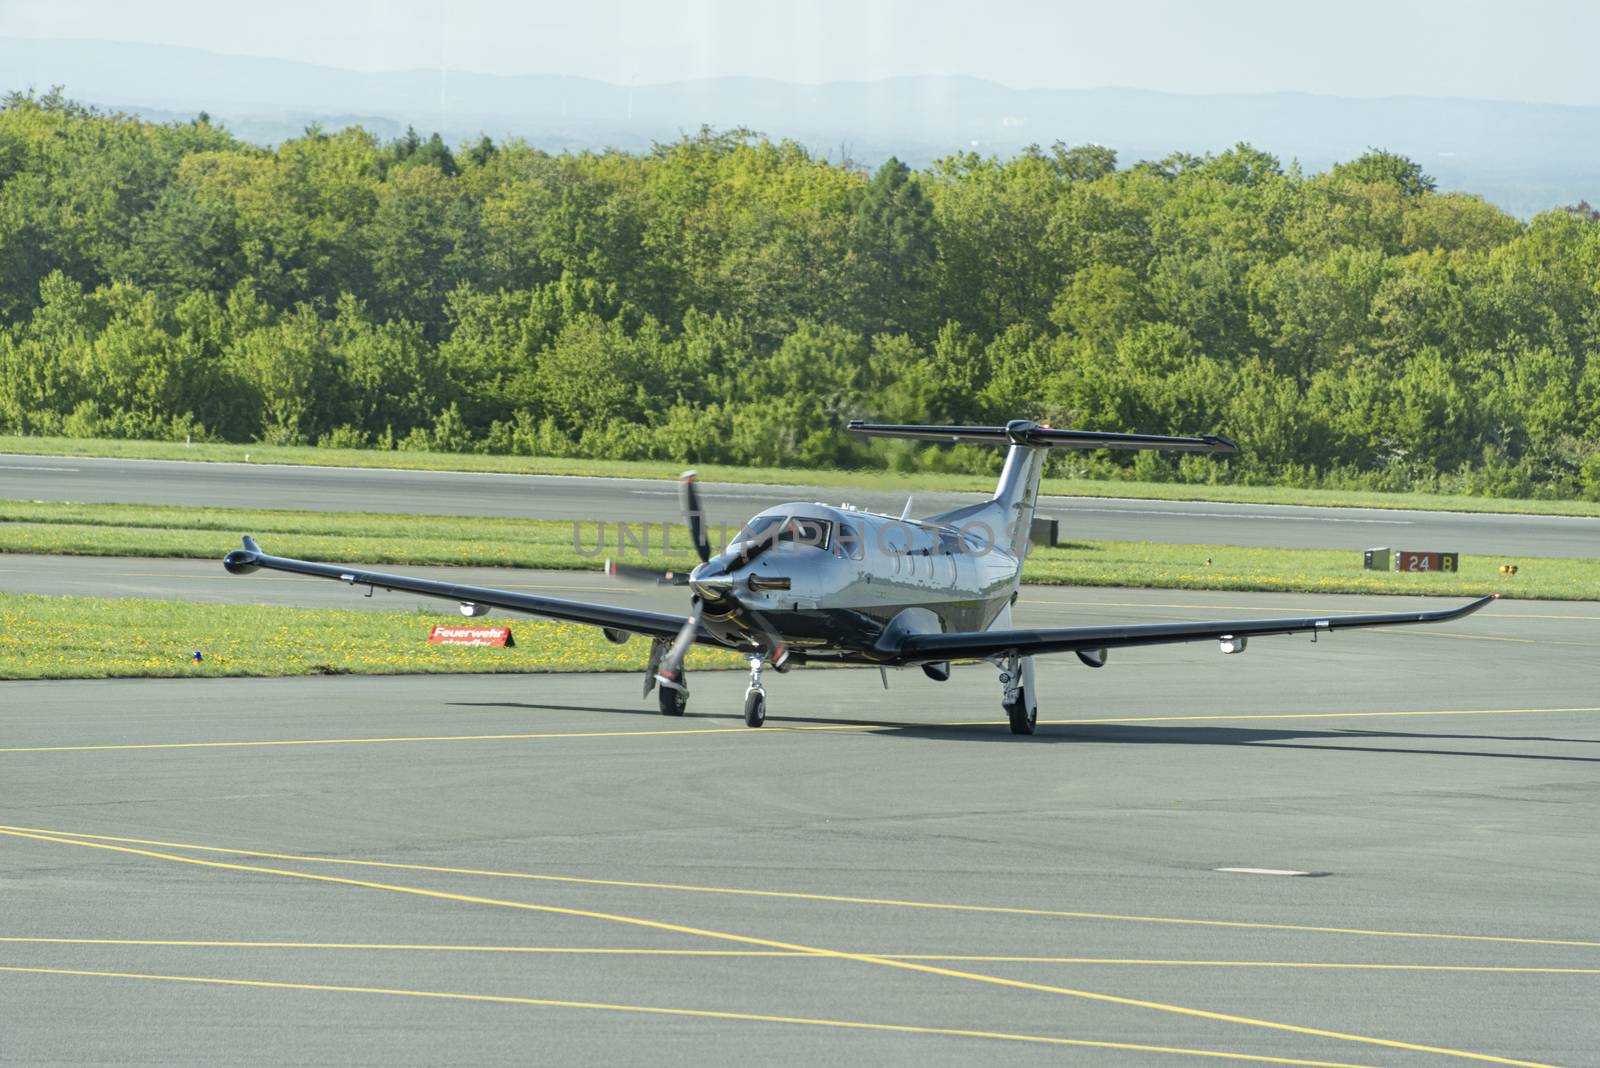 DE, North Rhine-Westphalia - April 2018: Privately owned Twin Propeller PILATUS Eagle, taxis after landing at Paderborn Airfield